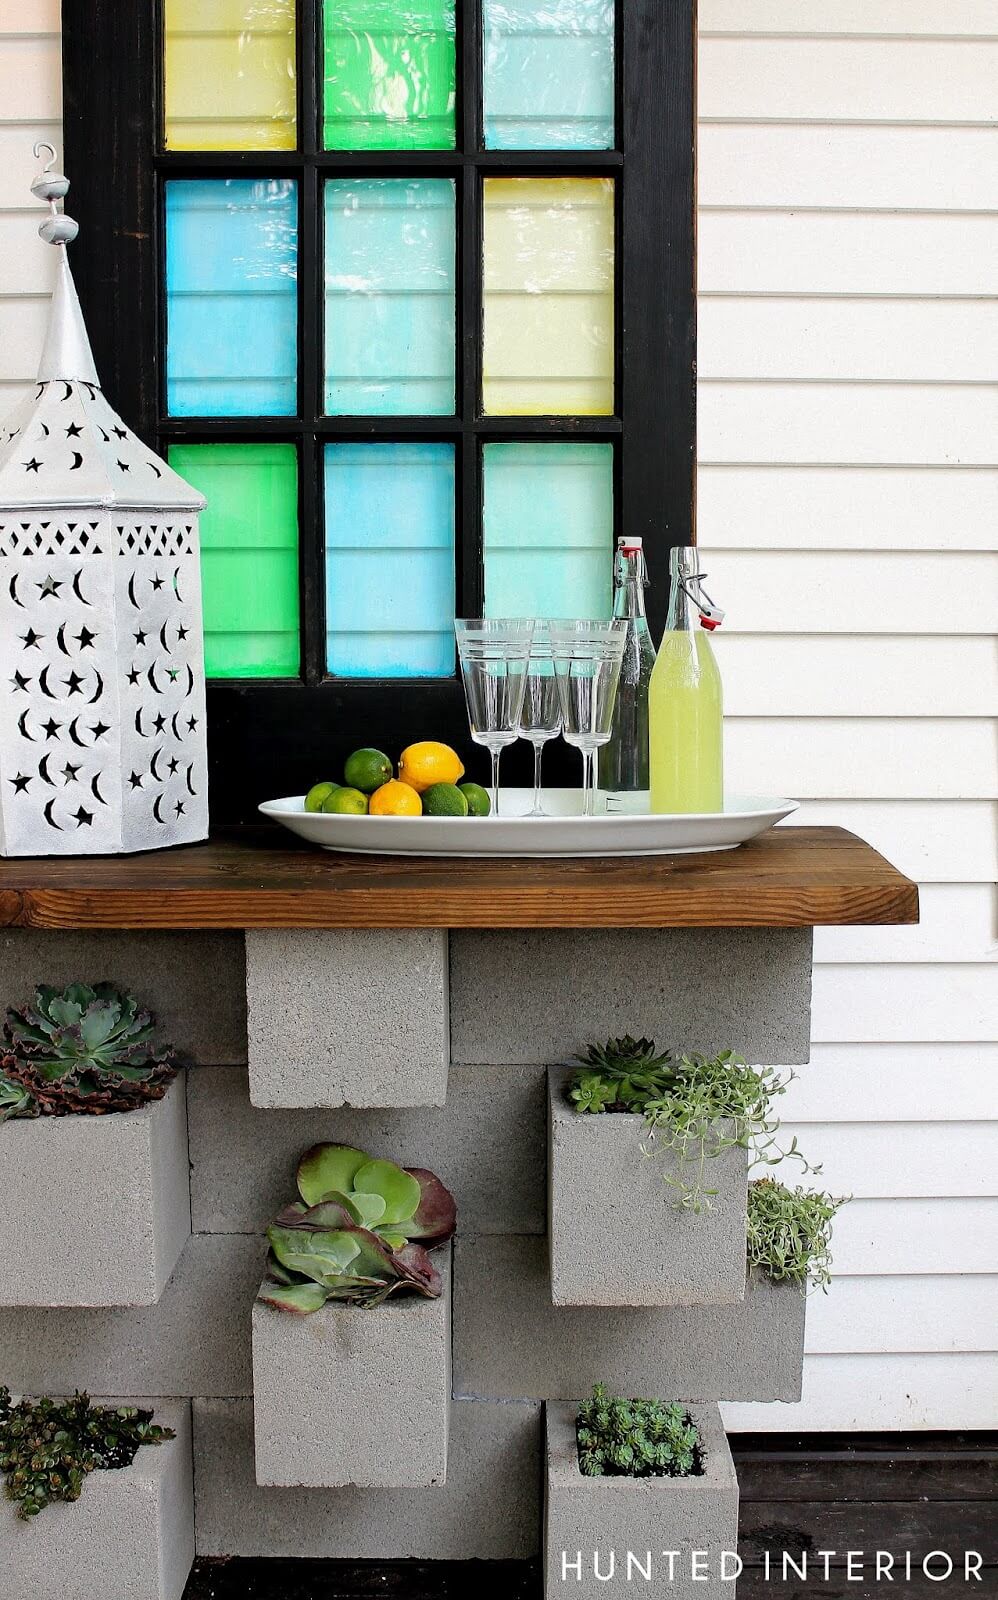 15 Creative DIY Outdoor Bar Projects For The Summer